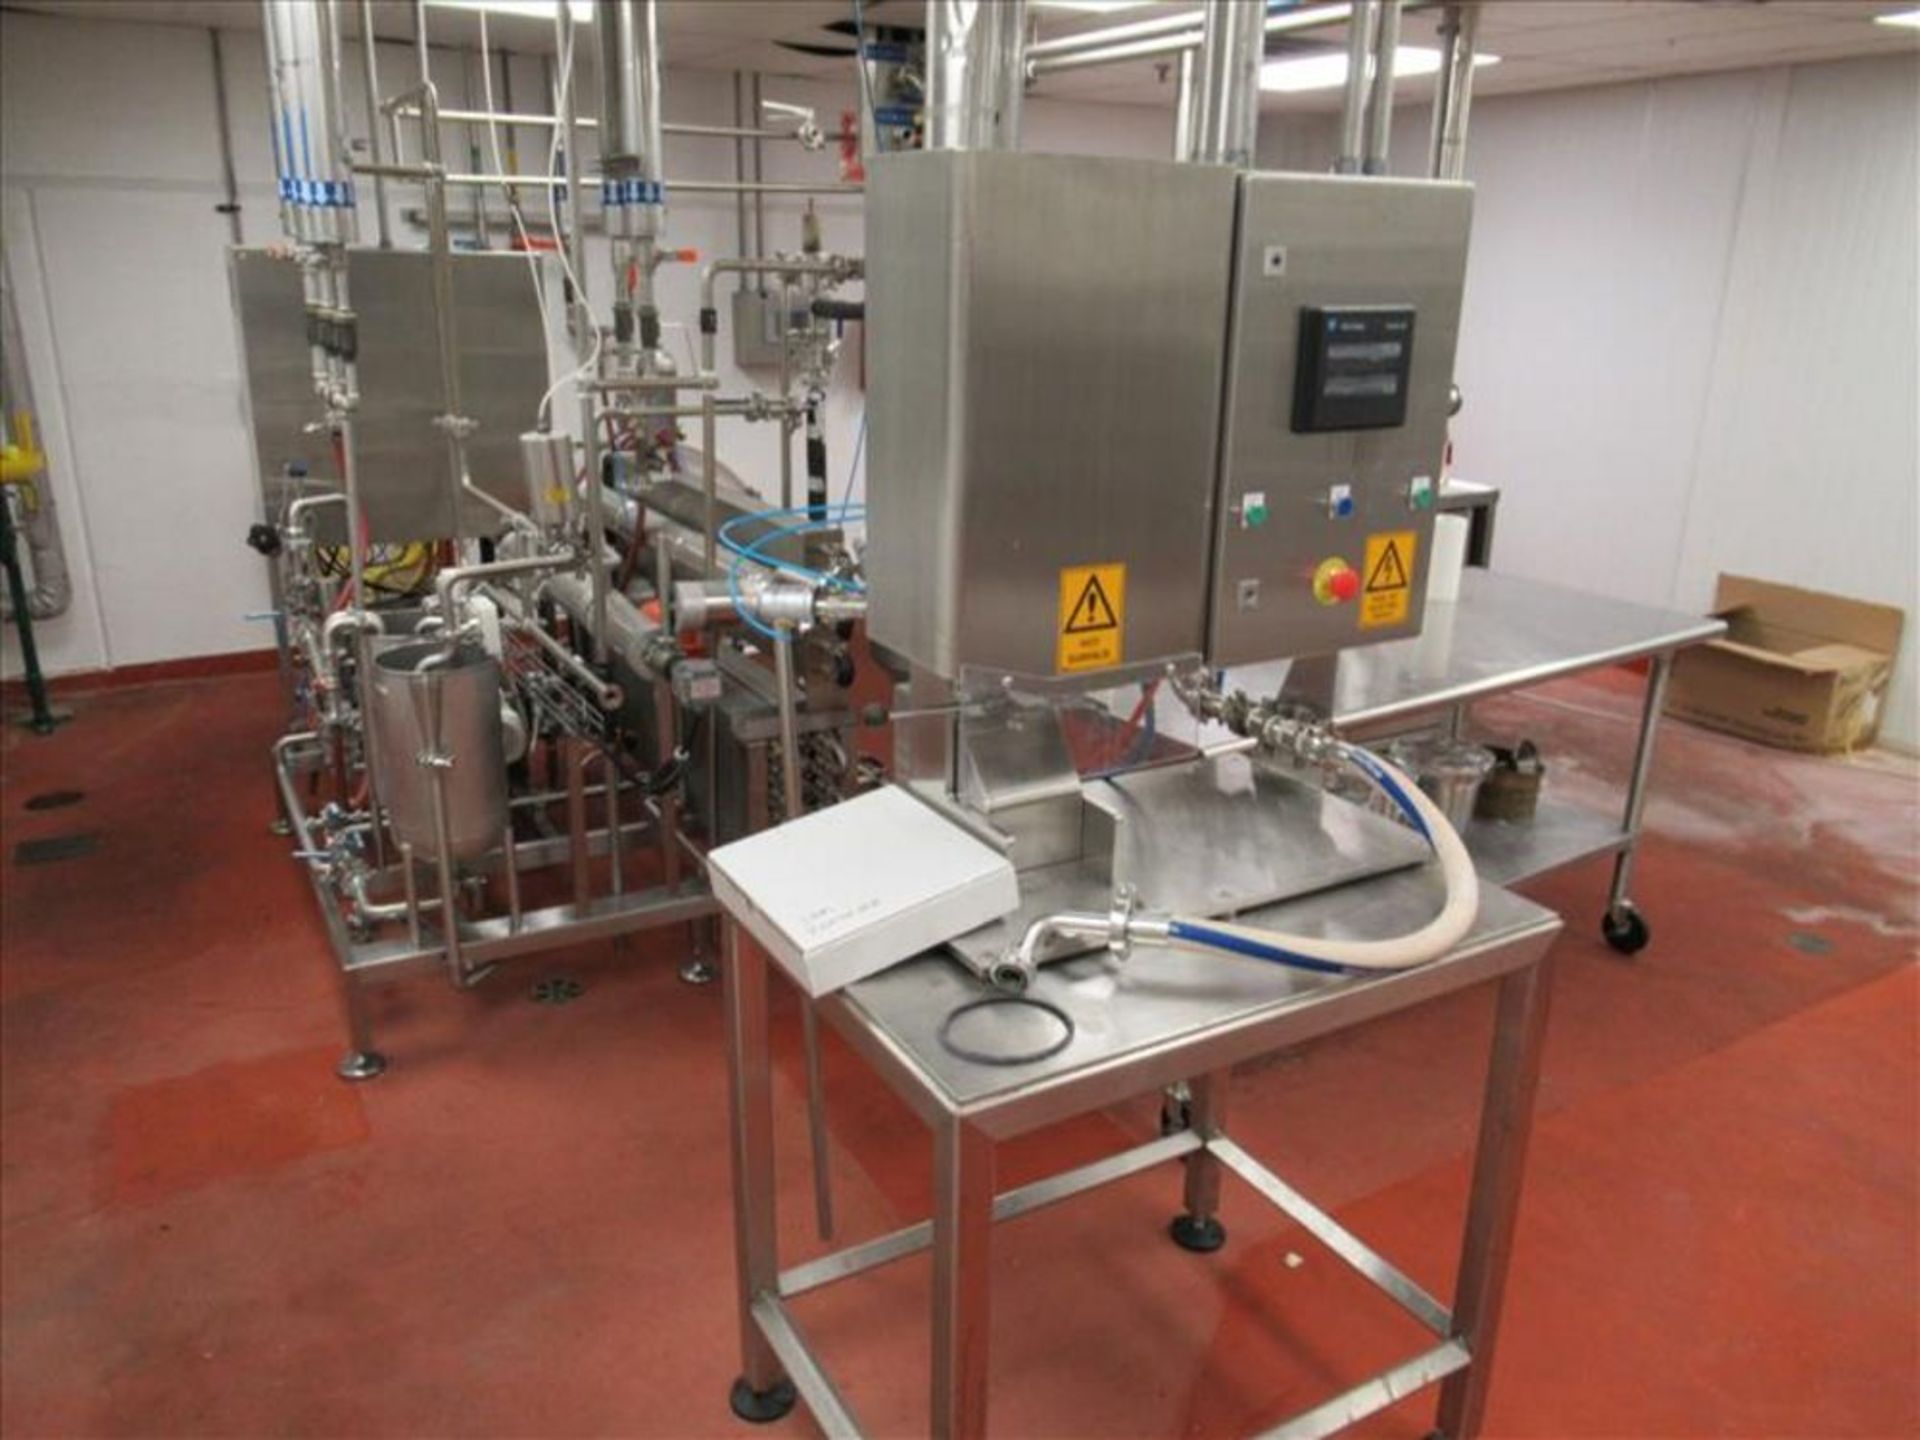 Intasept aseptic filling system mod. no. 2232 ser. no. 2232-04-09-04 Rapak Asia Pacific Int